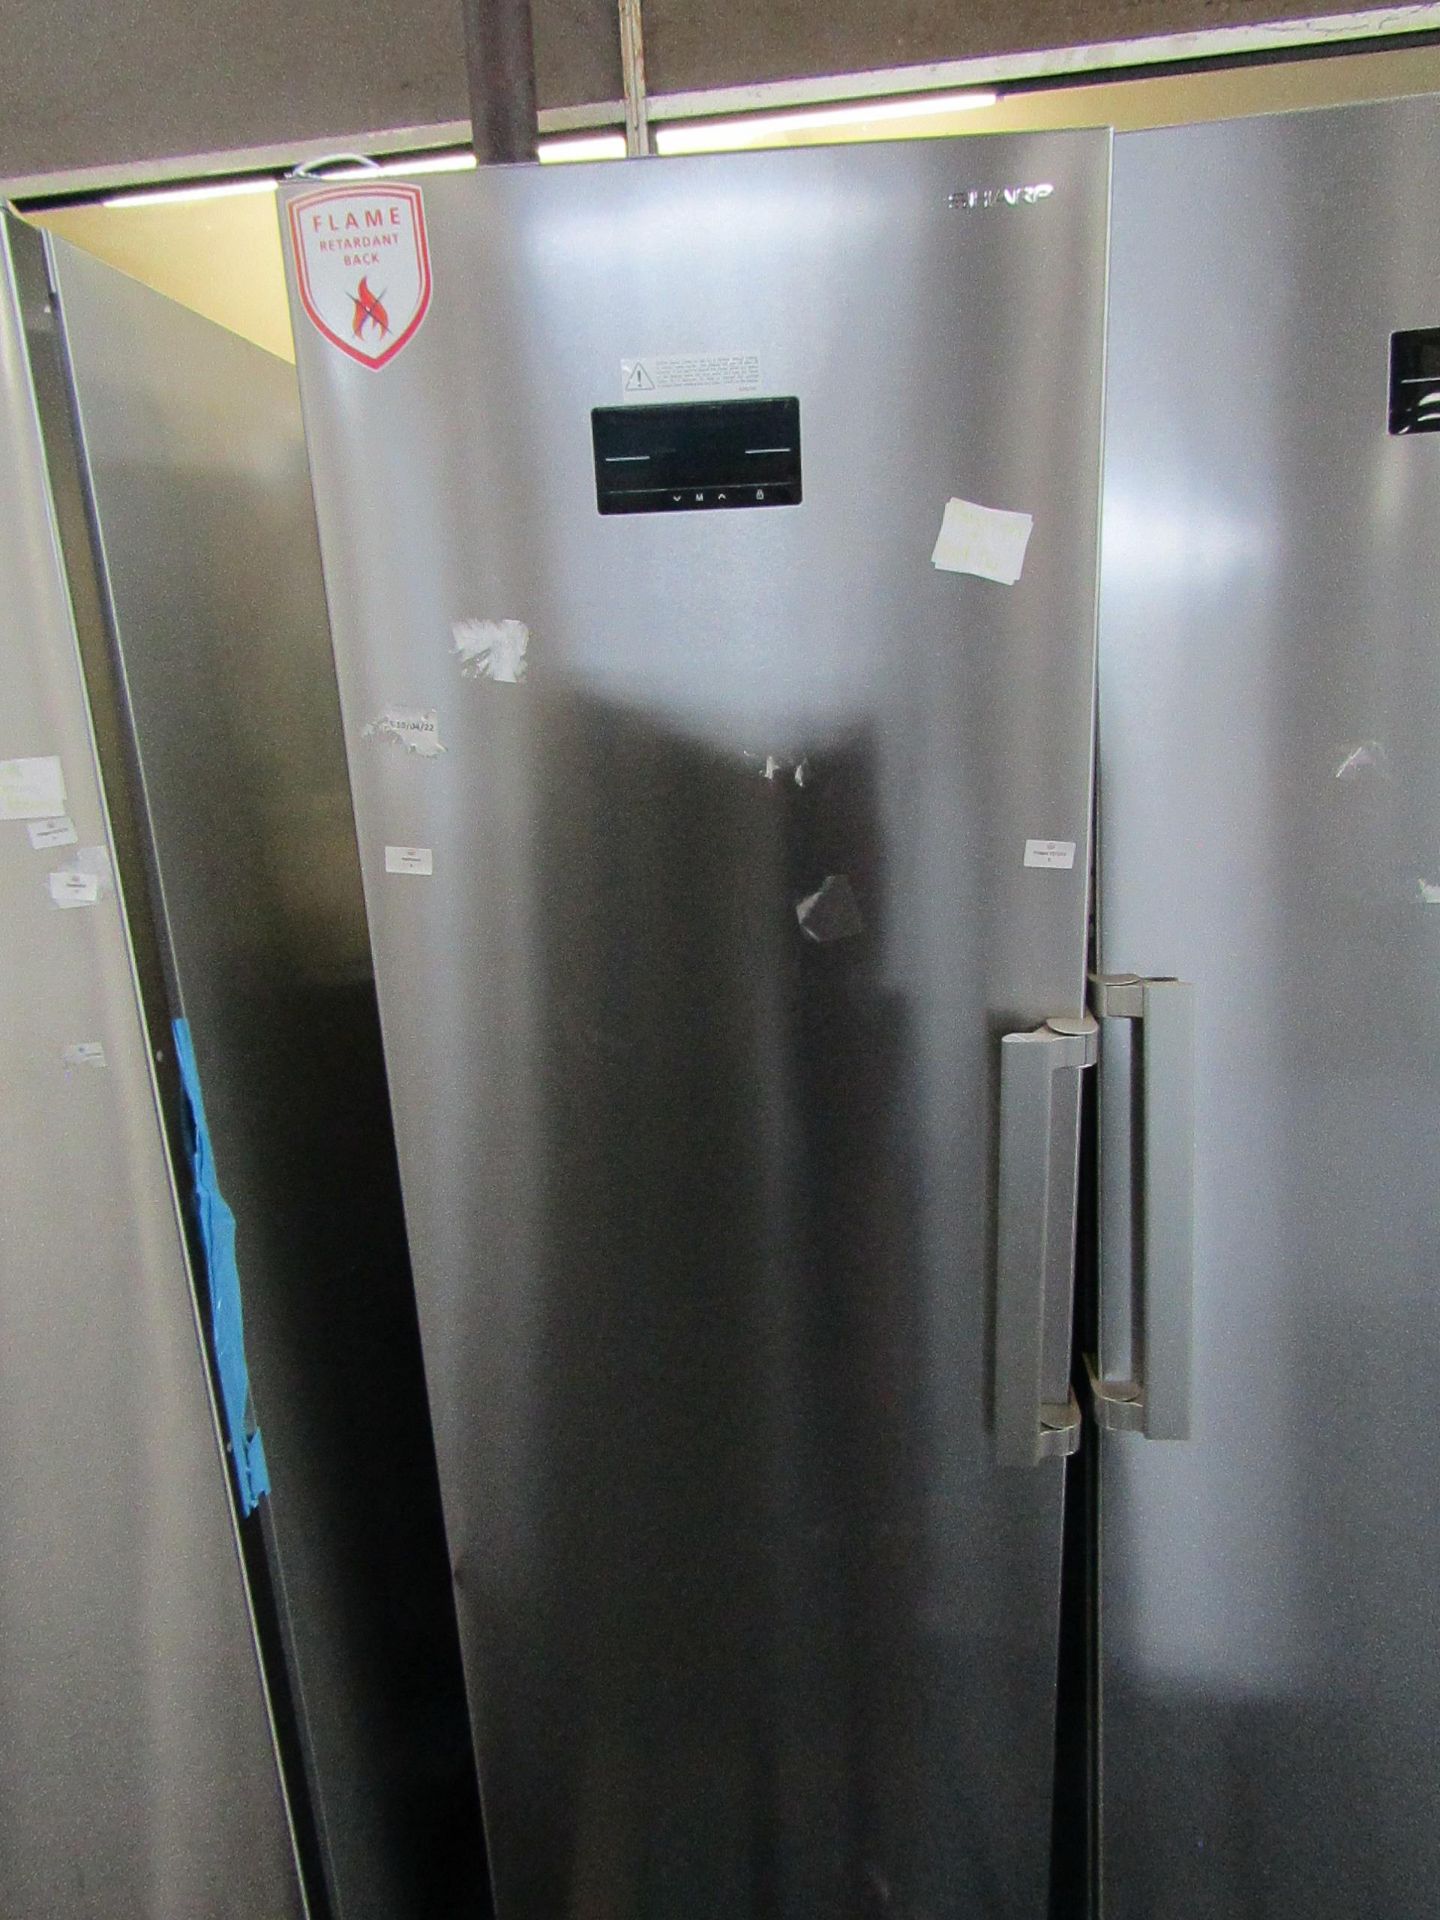 Sharp - Tall Stainless Steel Freestanding Freezer - Tested Working.